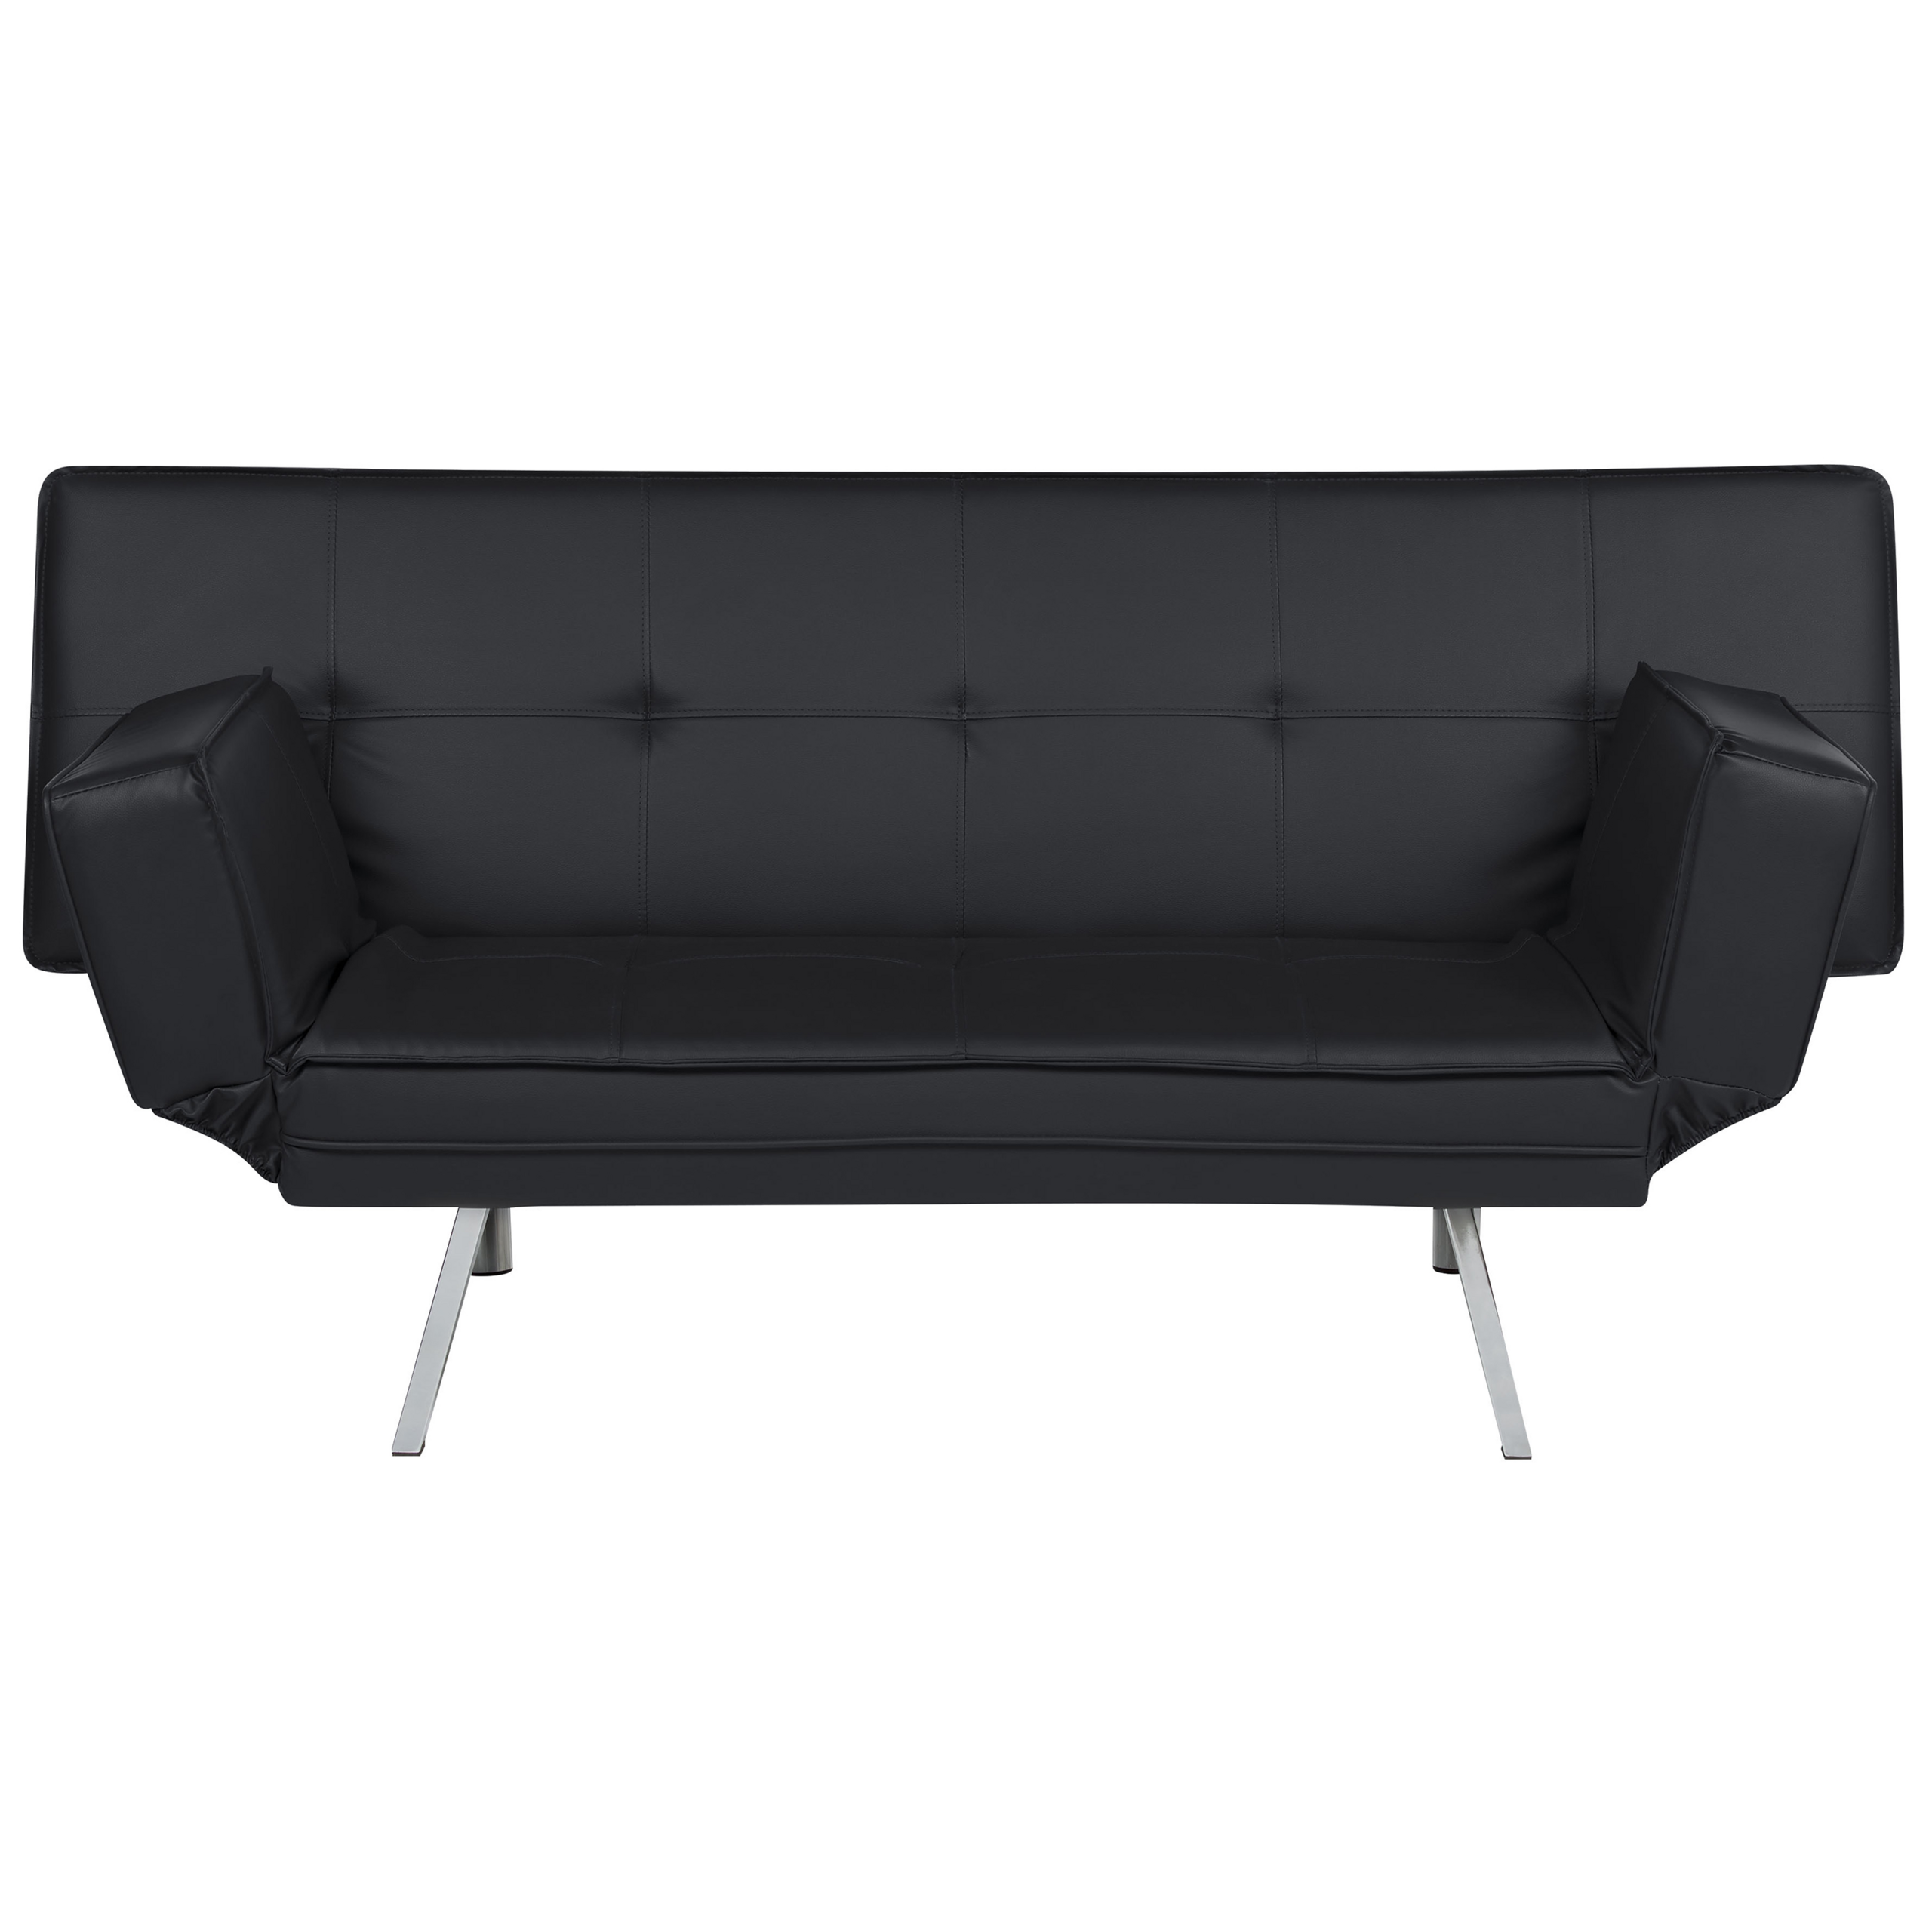 Beliani 3 Seater Sofa Bed Black Upholstered Faux Leather Polyester Fabric Armless Modern